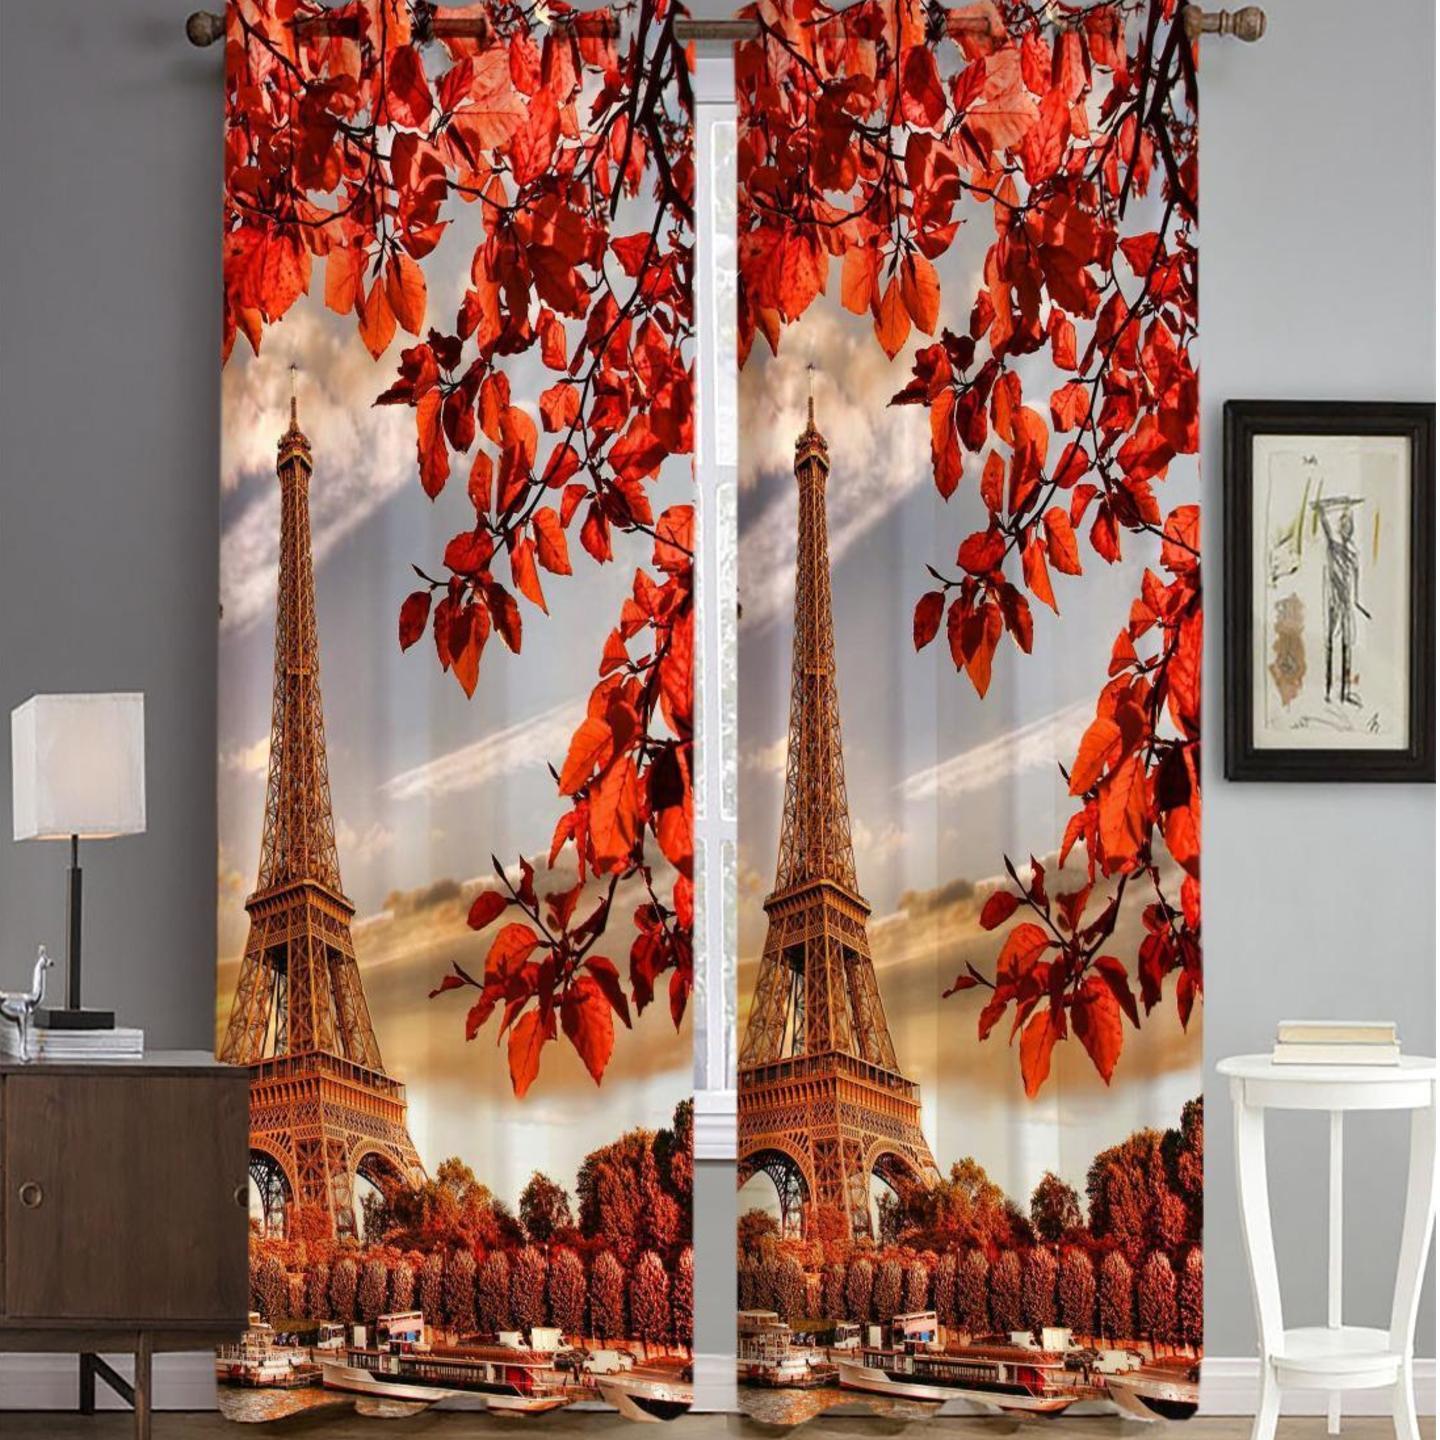 Handtex Home Heavy Fabric Digital Printed Curtain for Kids Room Decorative Washable Curtains for Living Room Bedroom Home Office Decor Set of 2 4x9